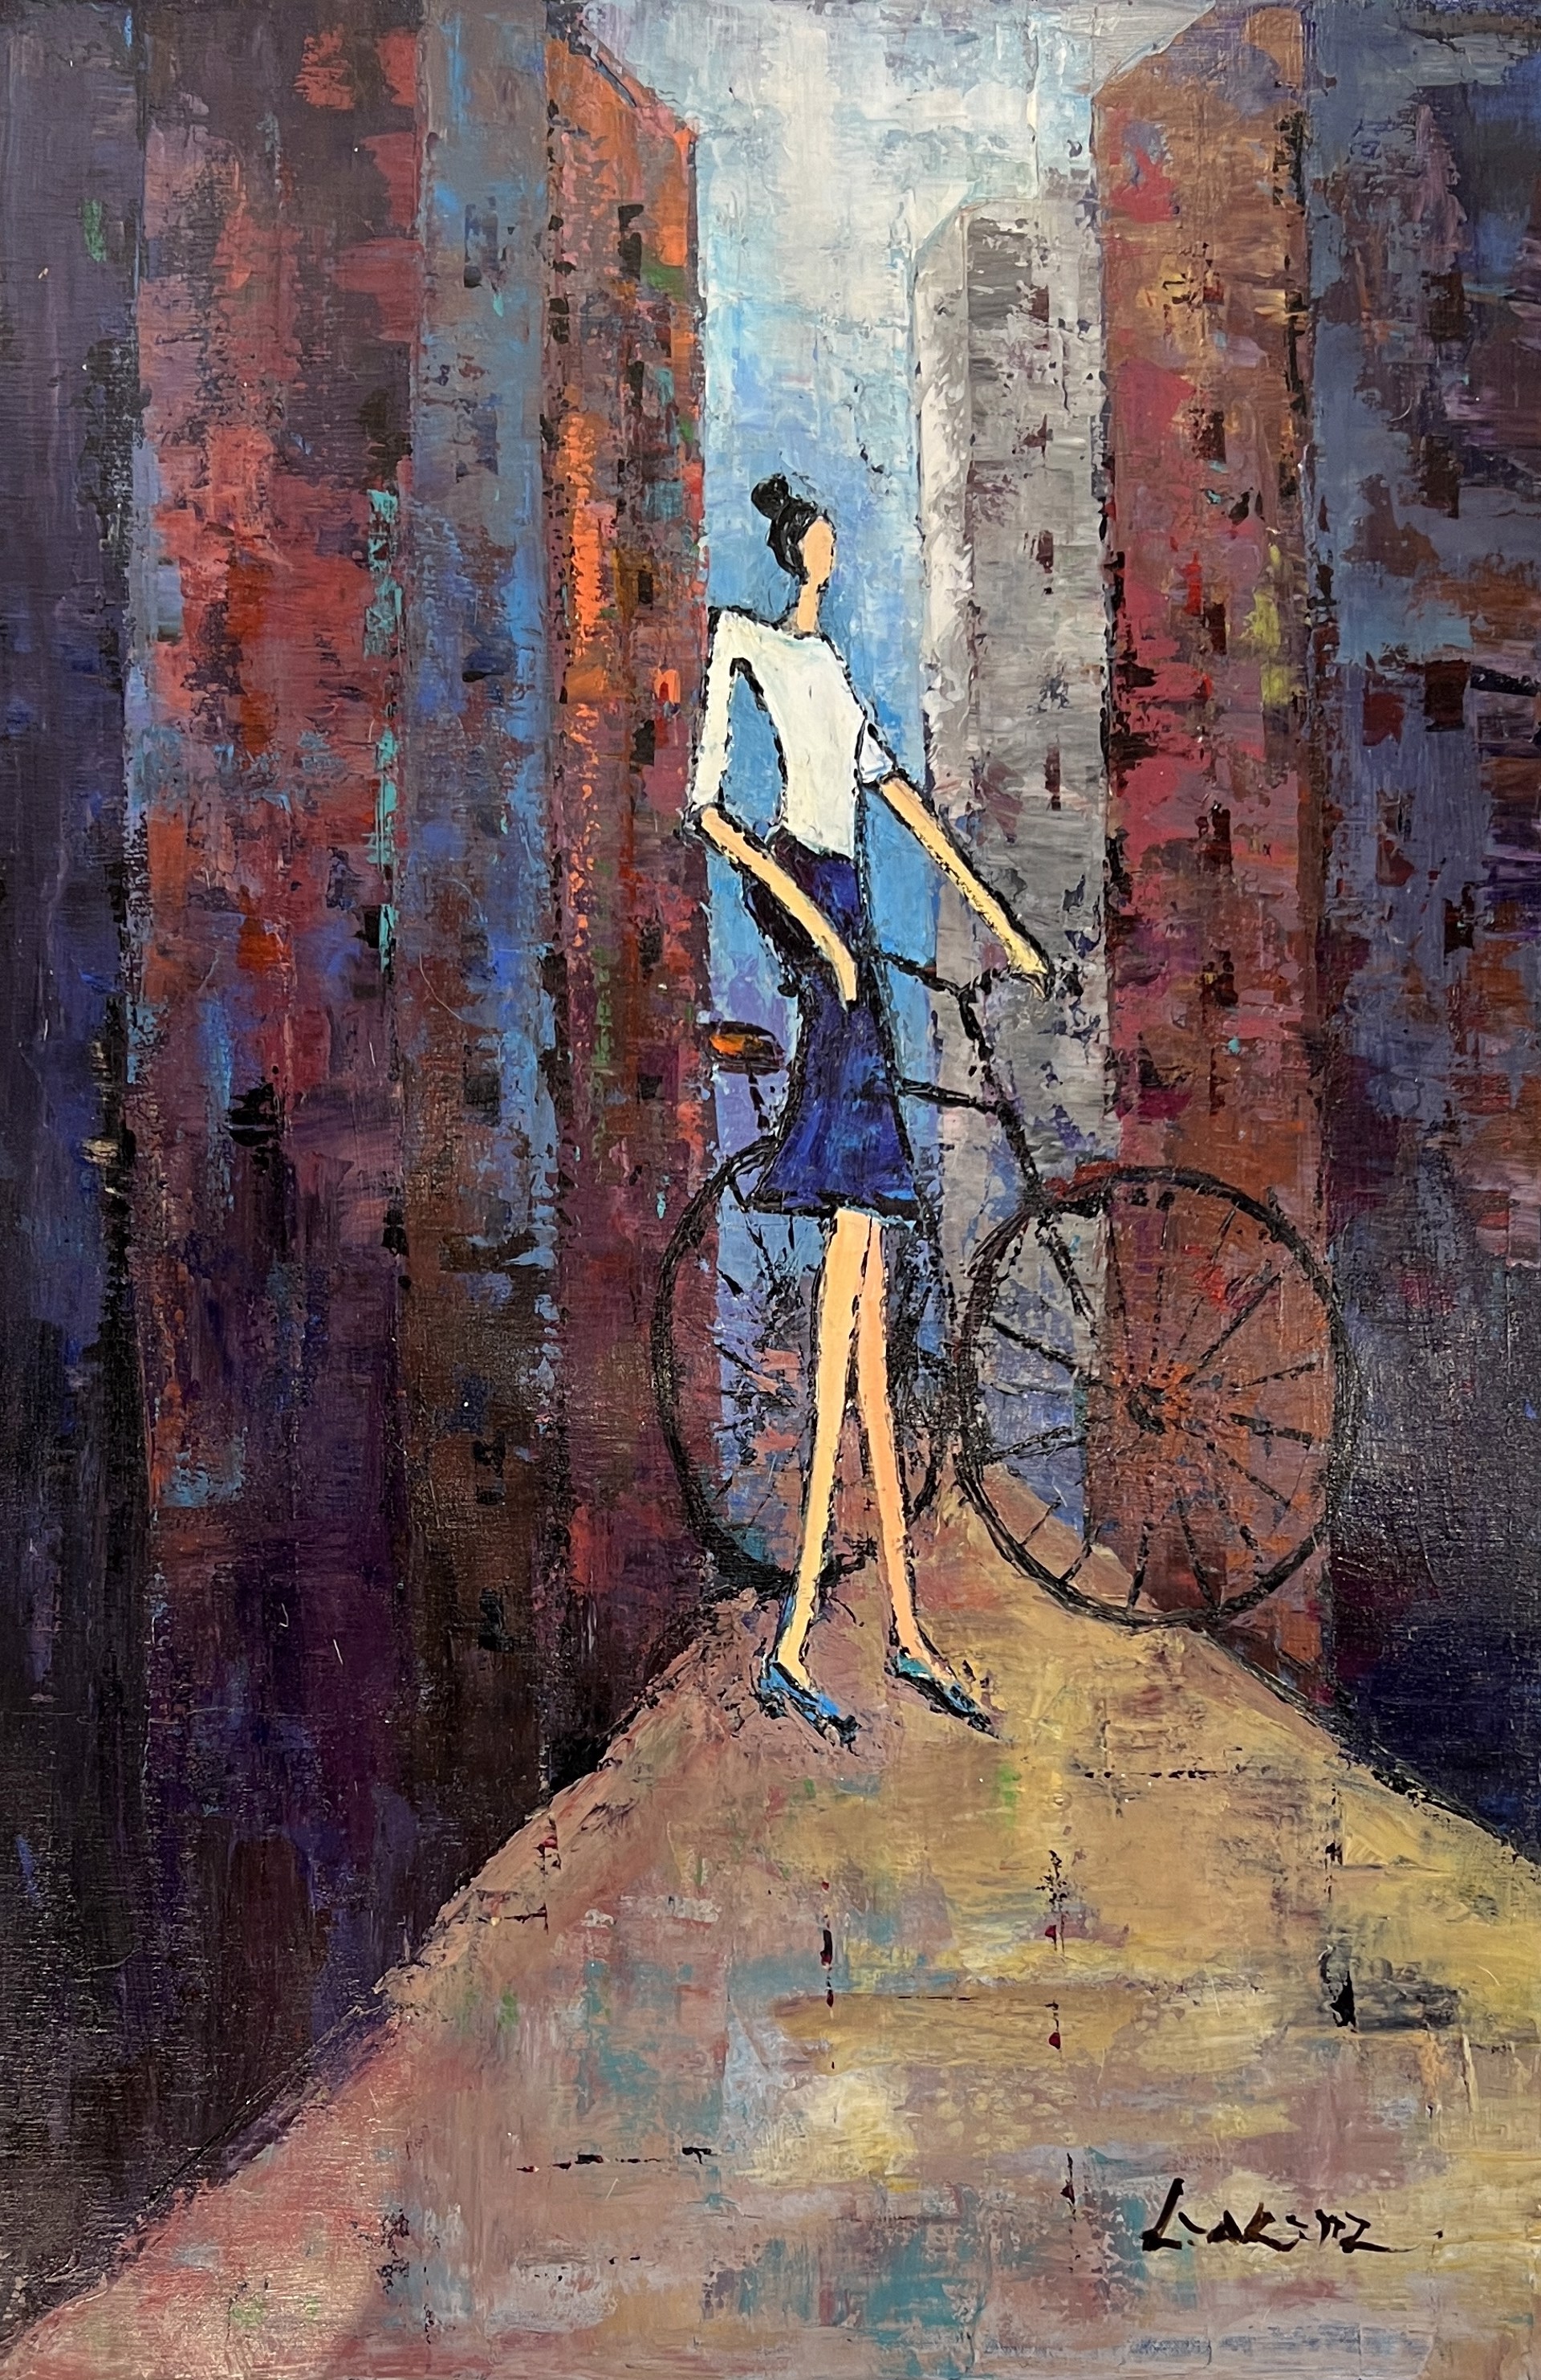 CYCLIST IN BLUE AND WHITE by LIA KIM